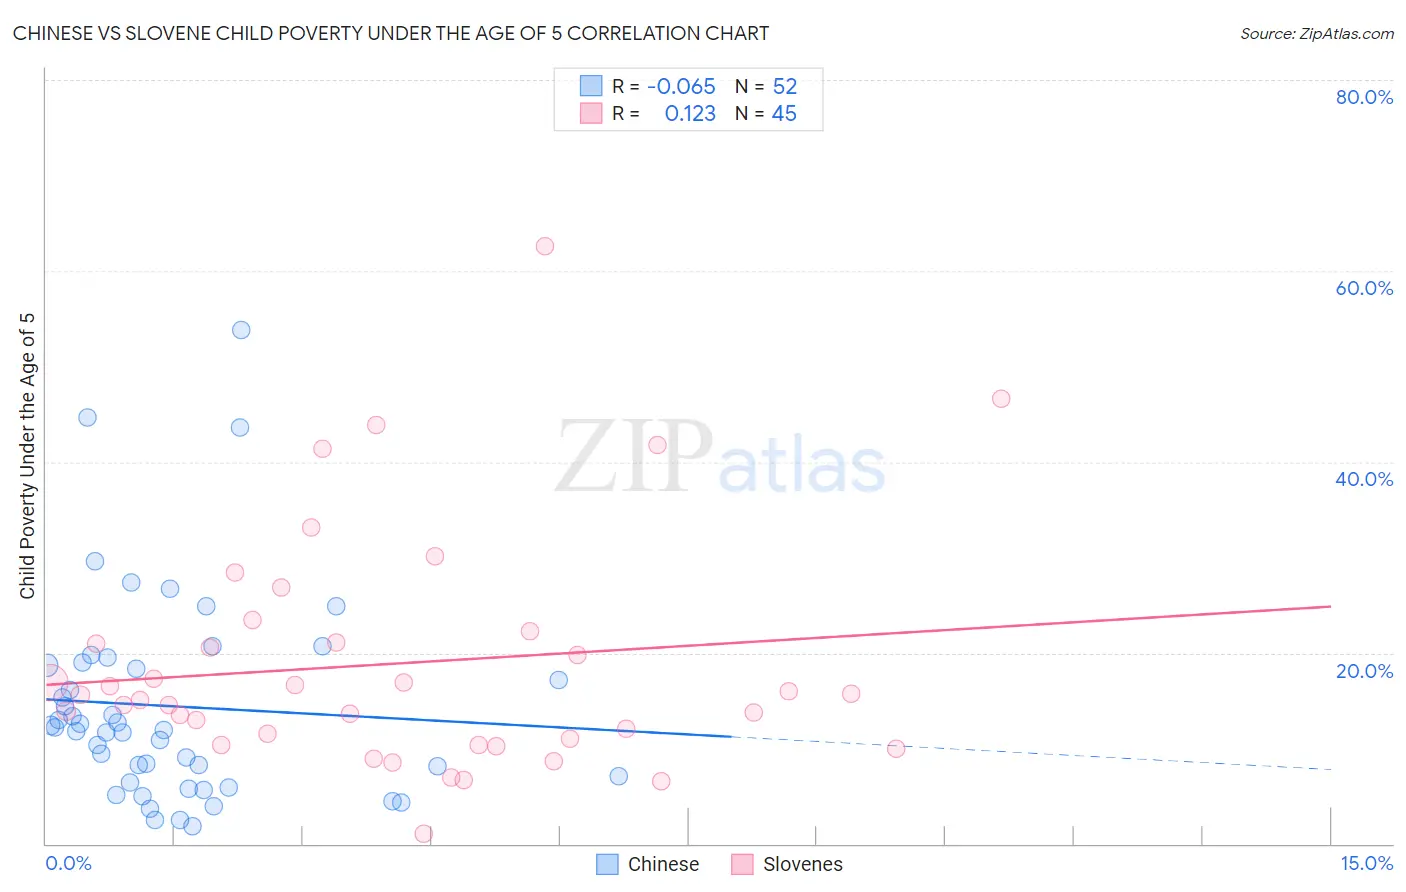 Chinese vs Slovene Child Poverty Under the Age of 5